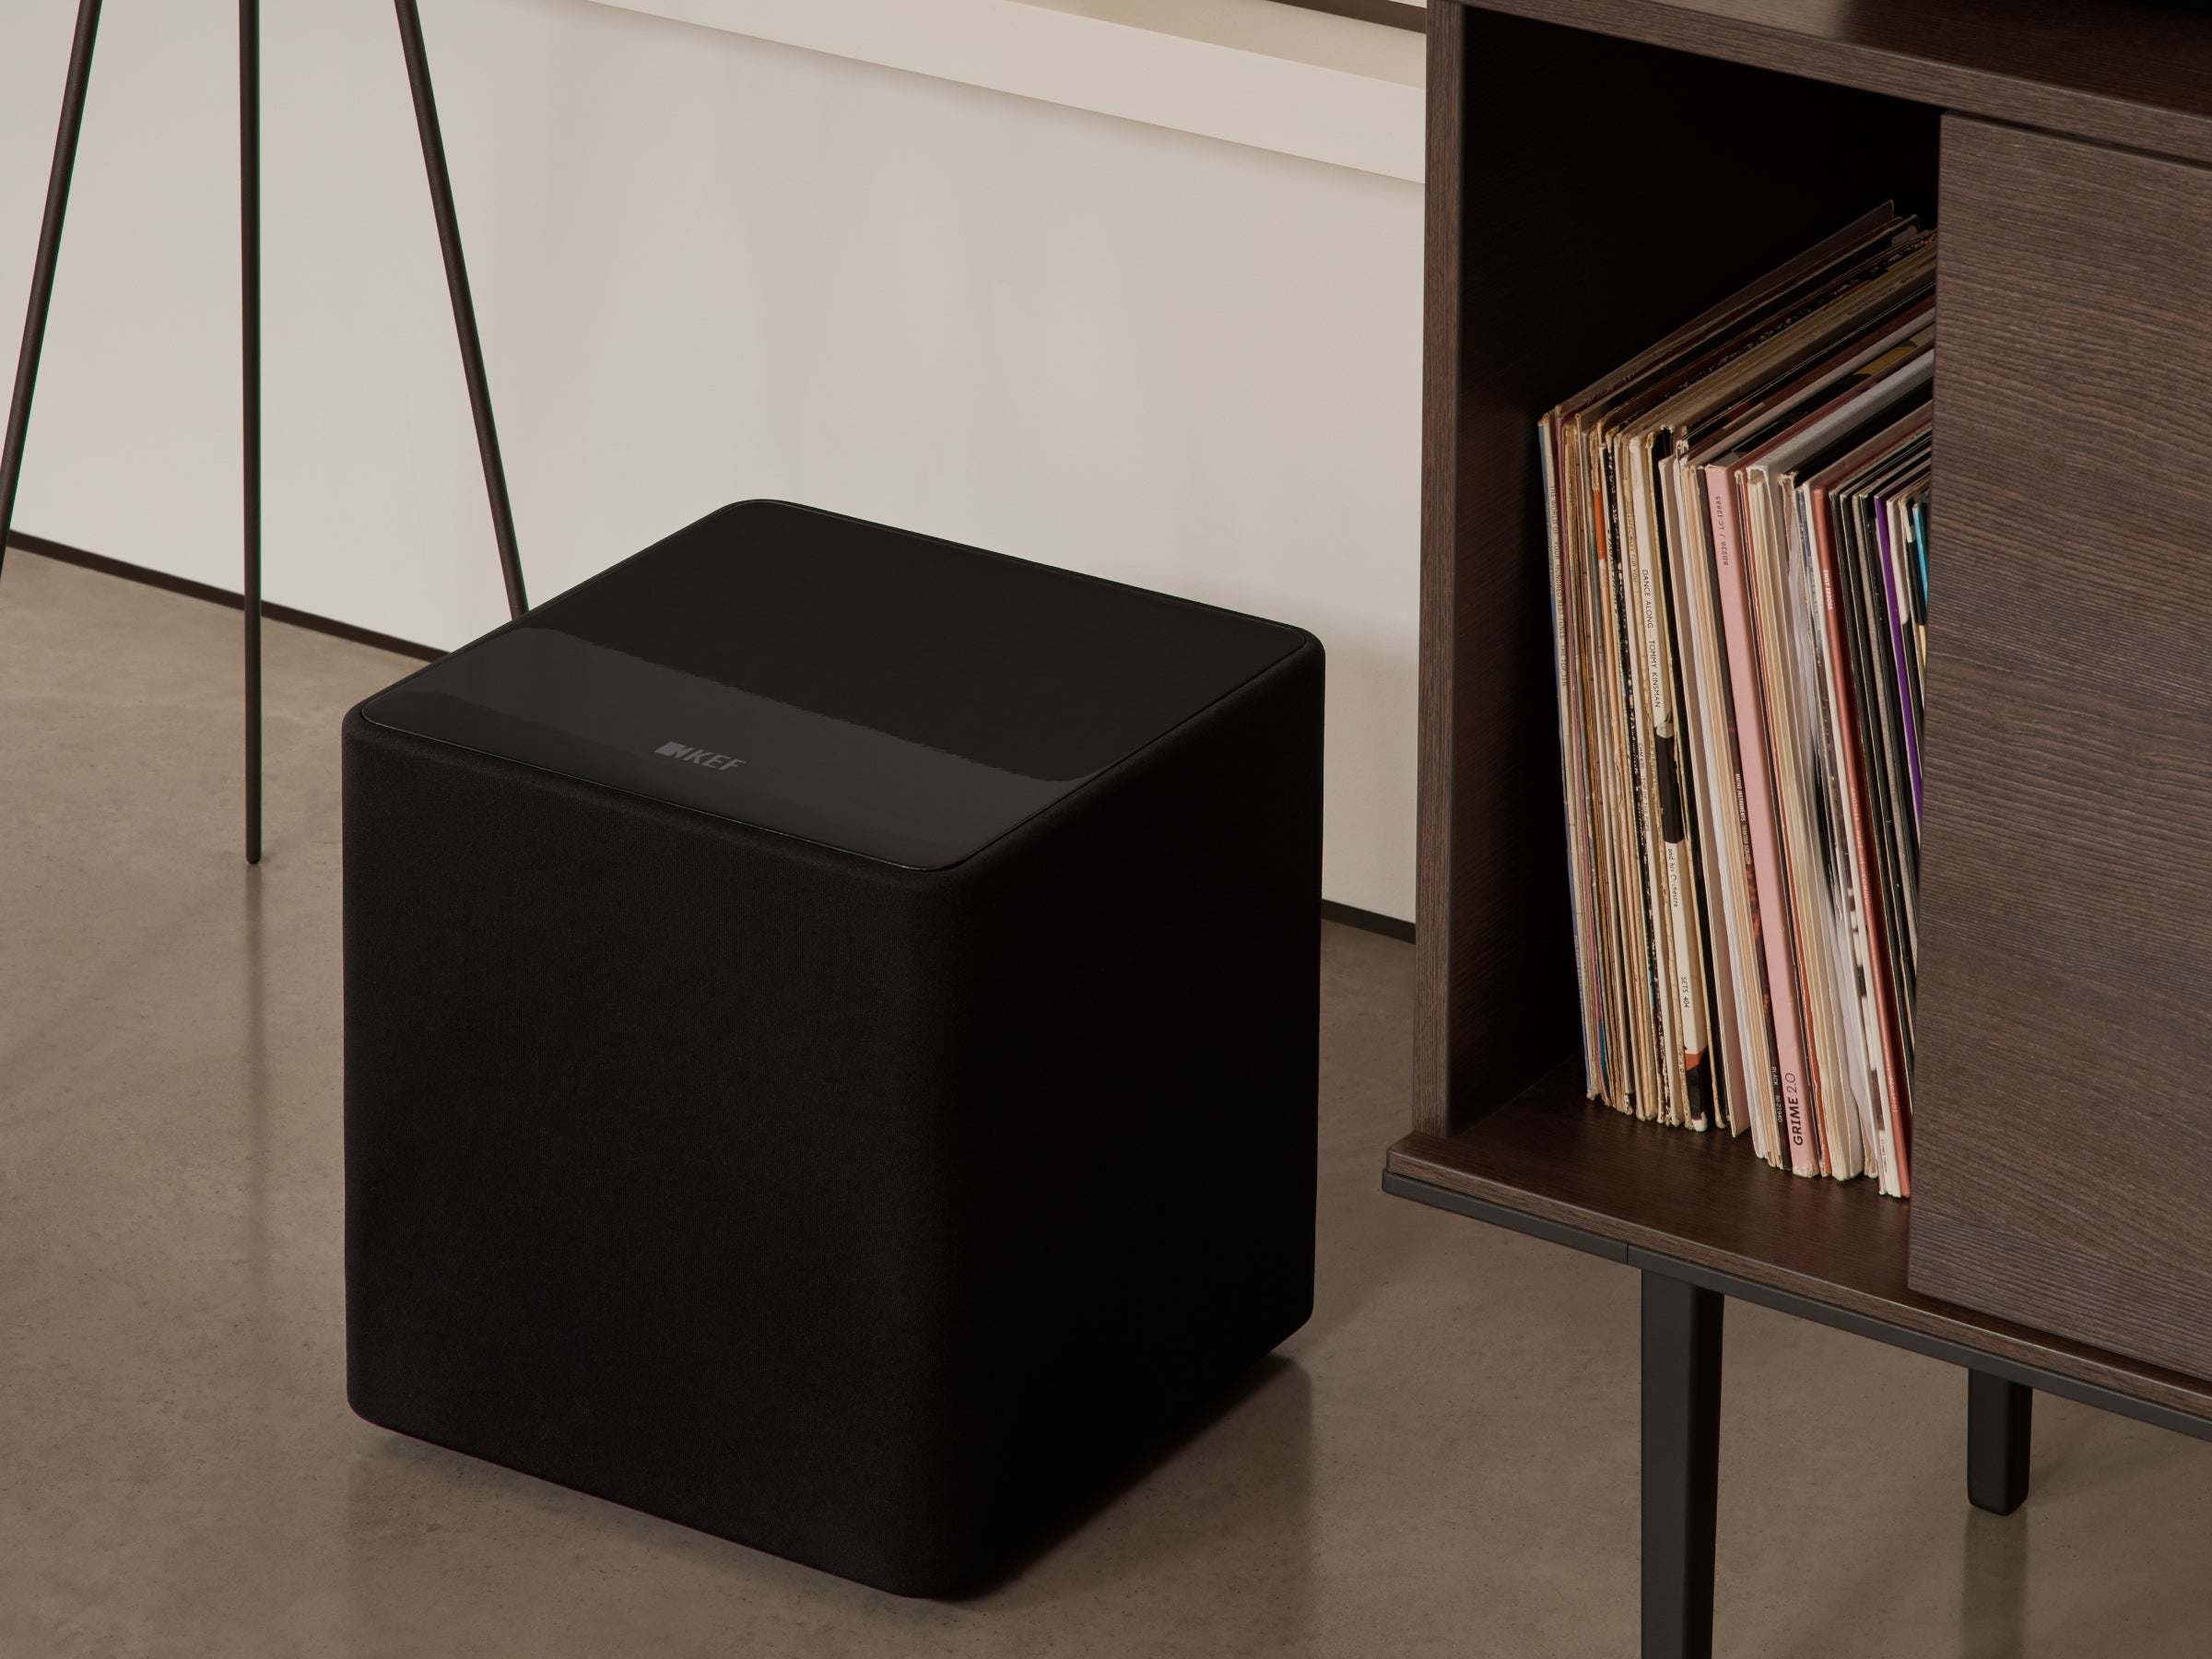 KEF Kube 10 MIE Subwoofer